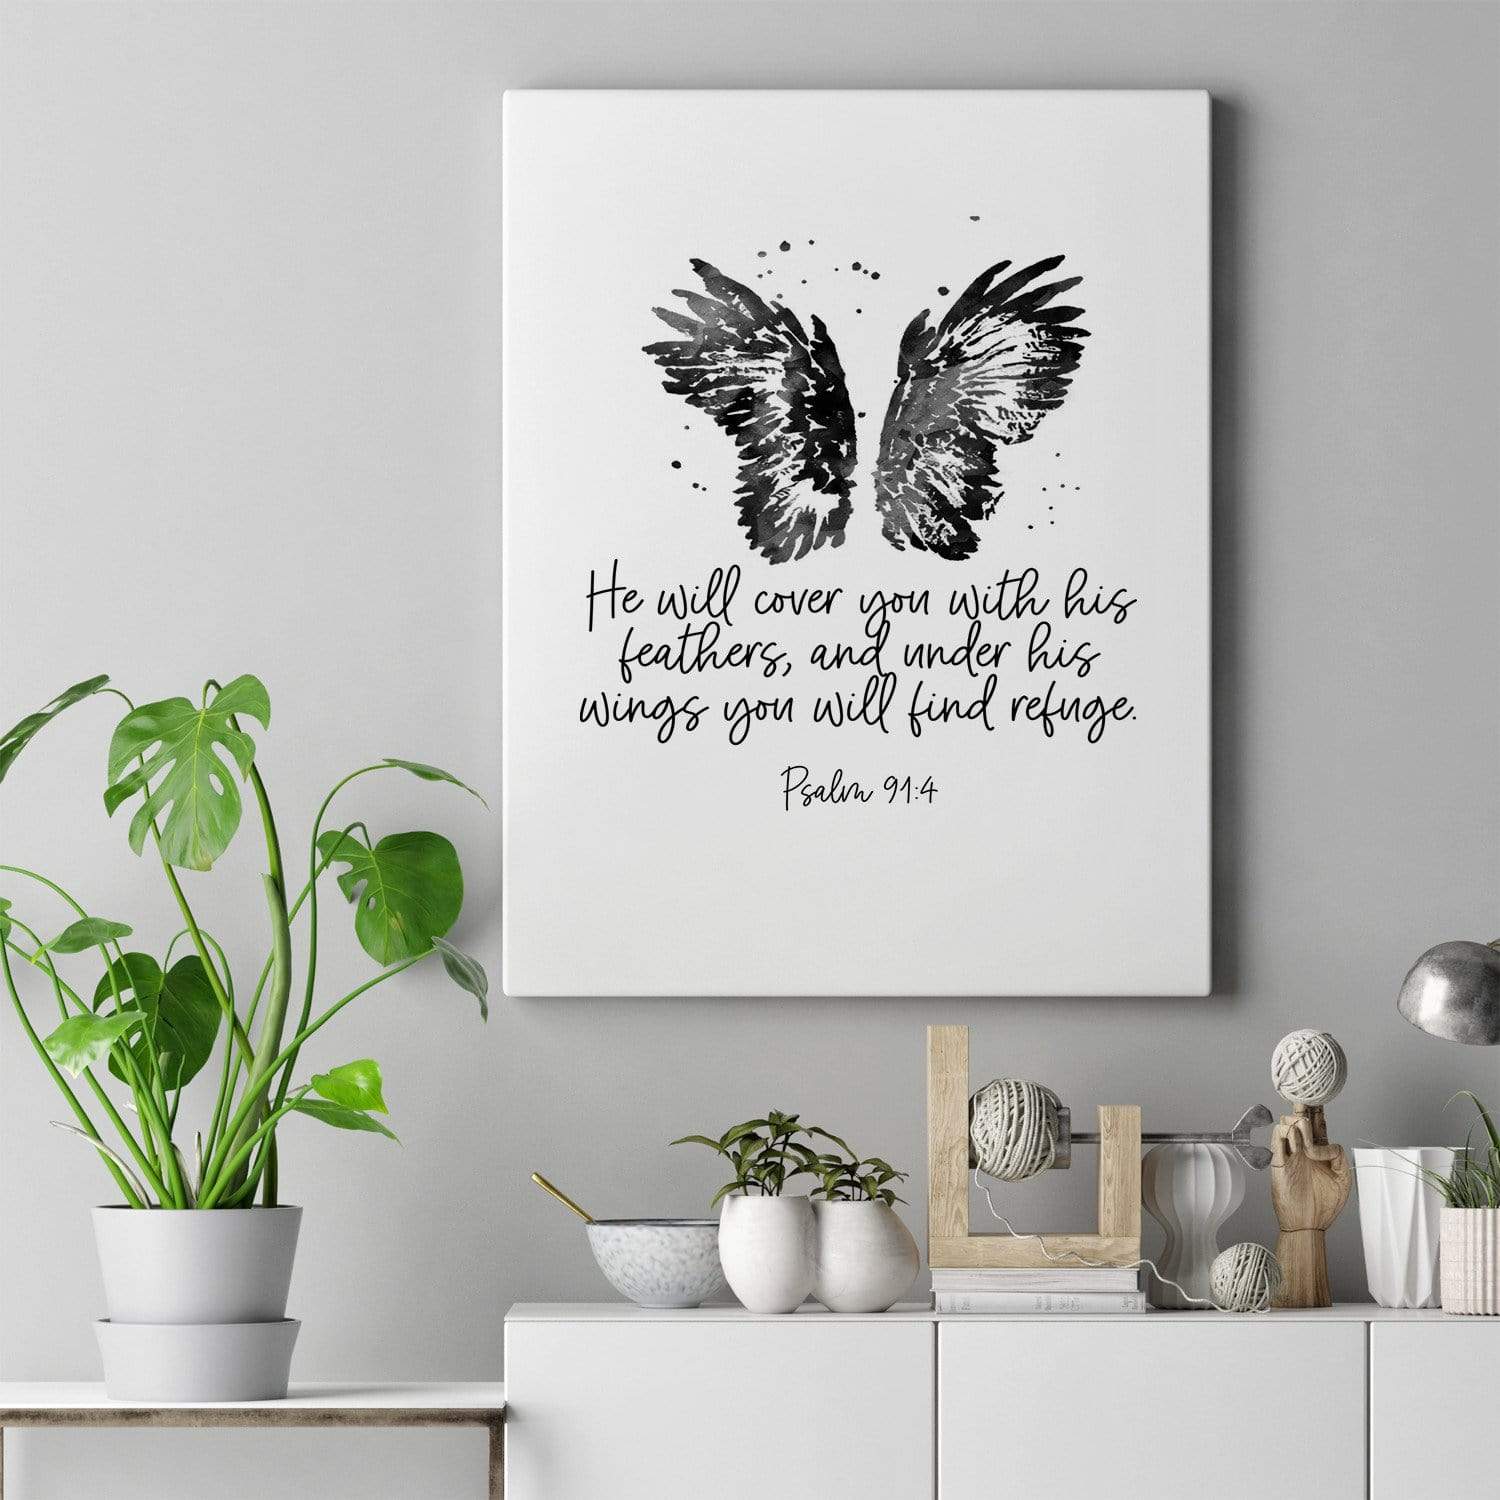 Living Words Wall Decor Under His Wings